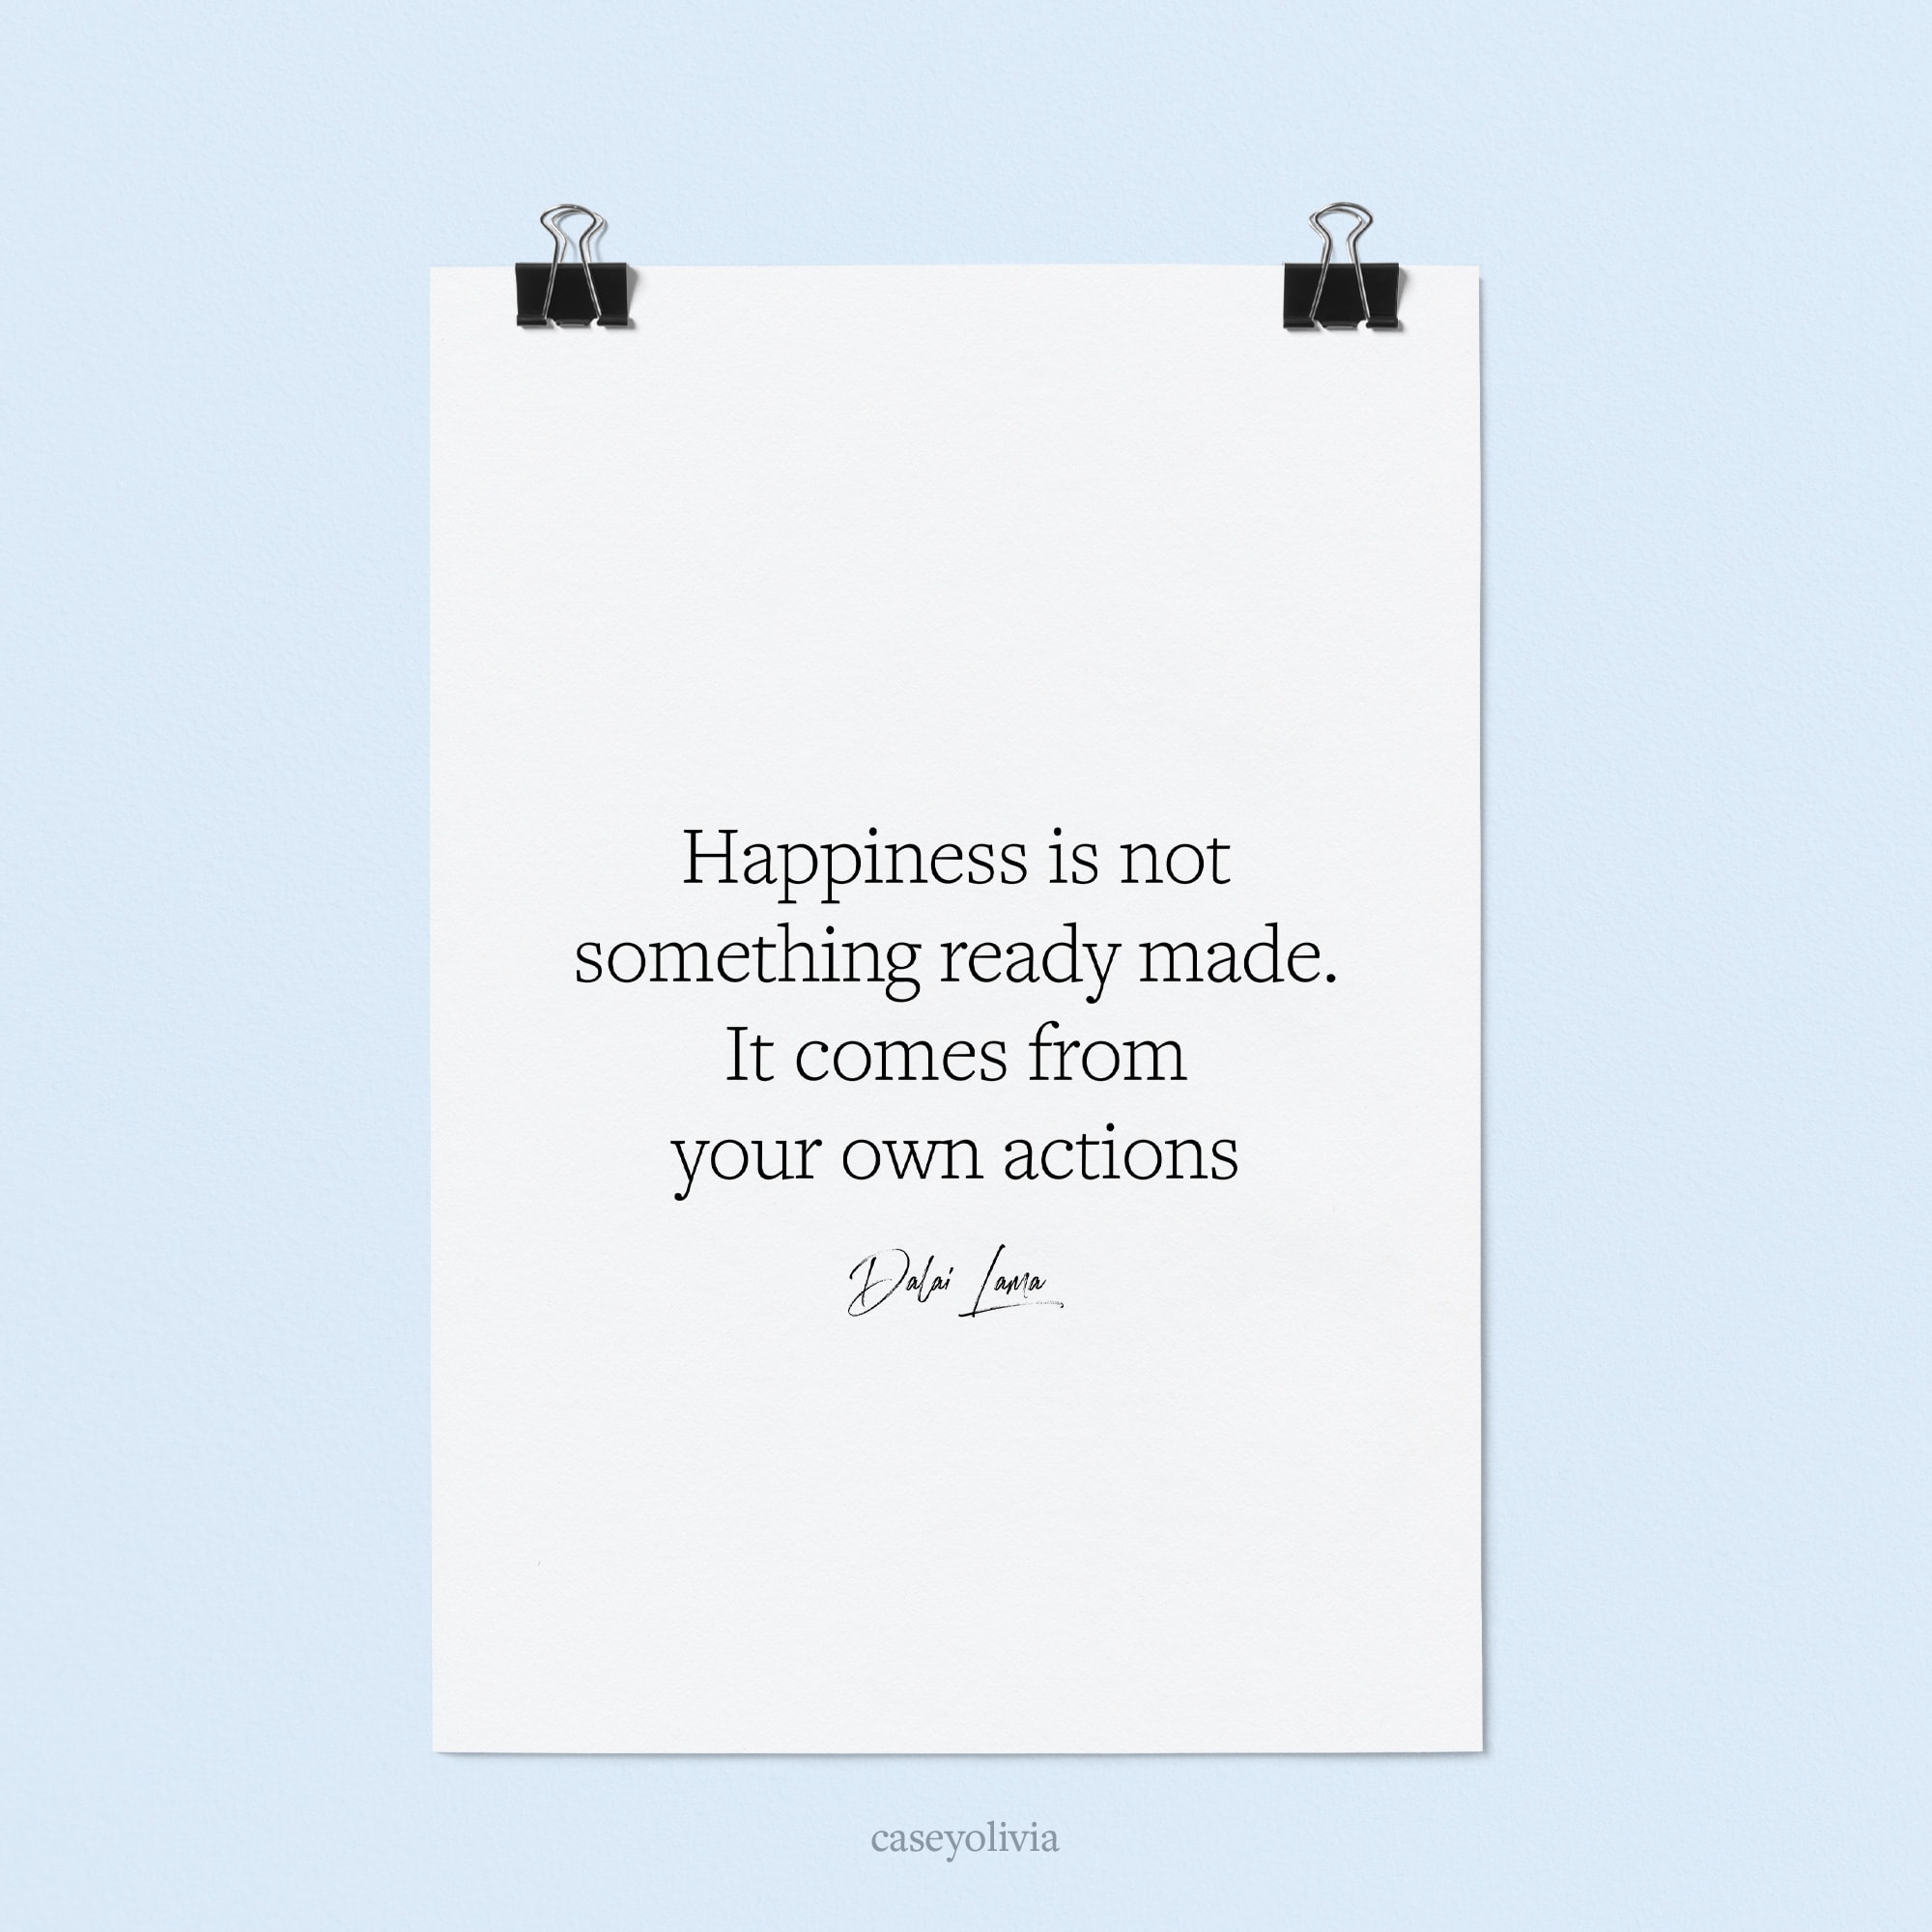 be happy dalai lama quote to print for home office walls